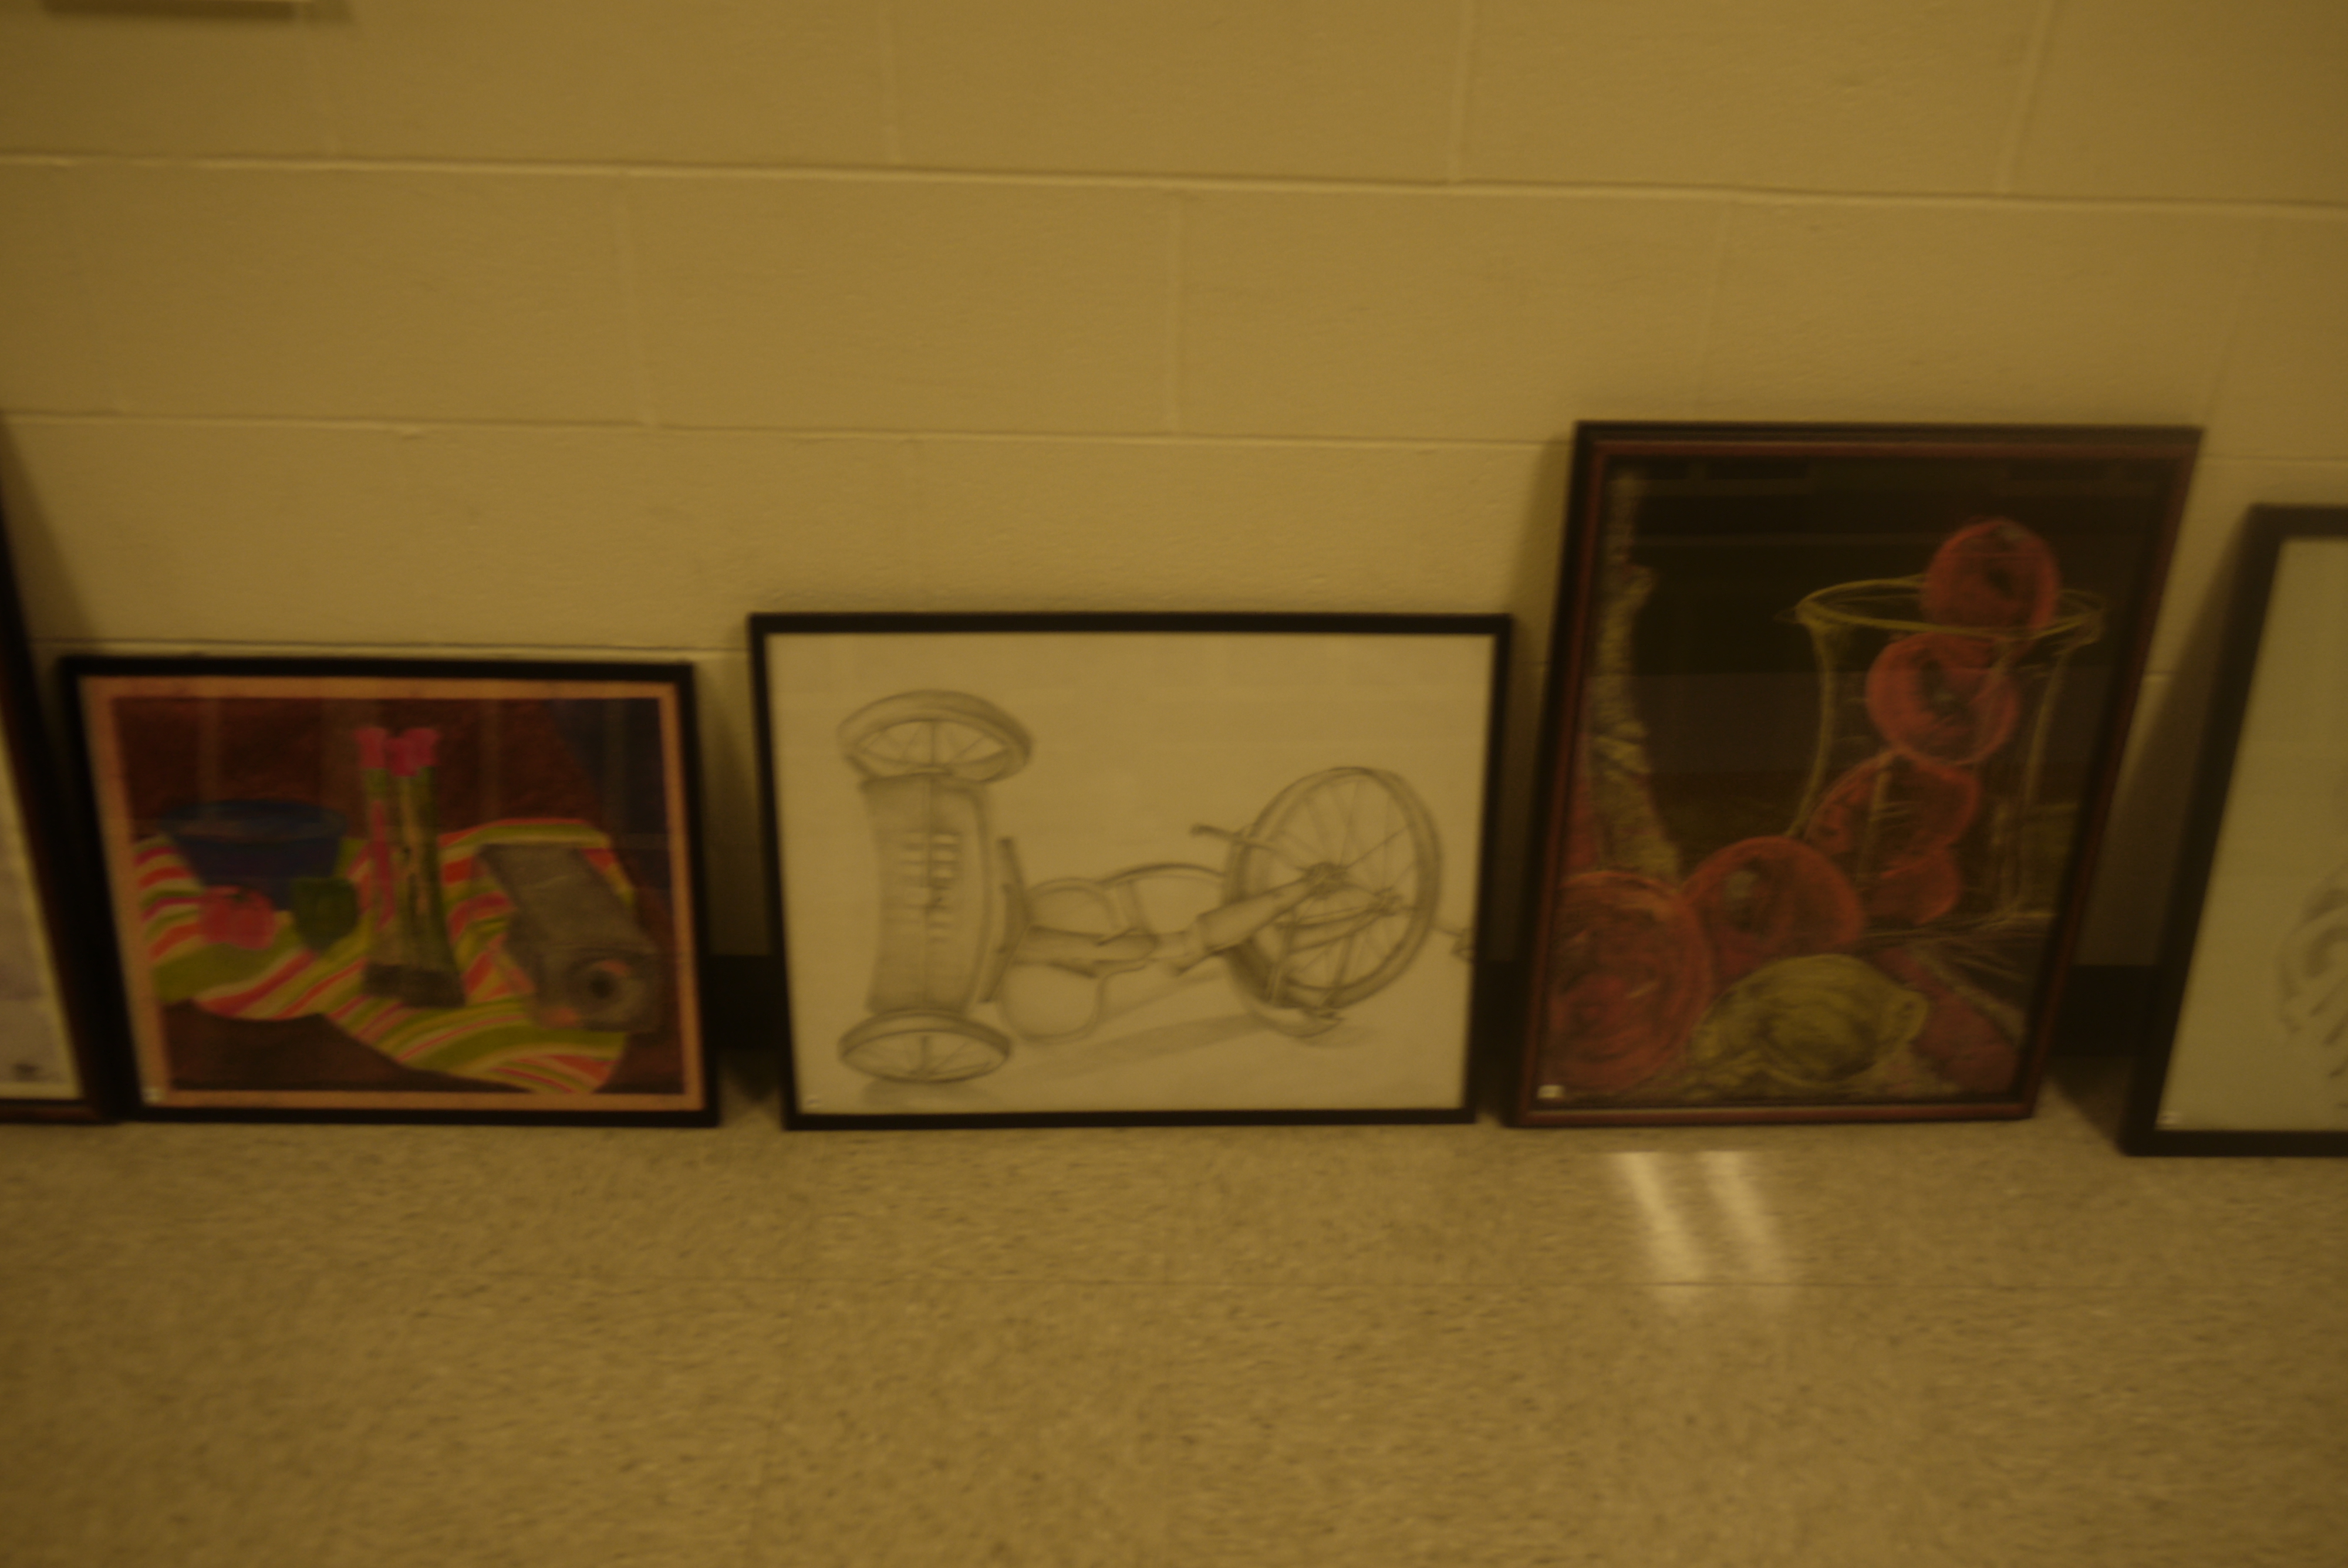 Student work from the art walk fundraiser. Photo by Gabriella Onessimo.